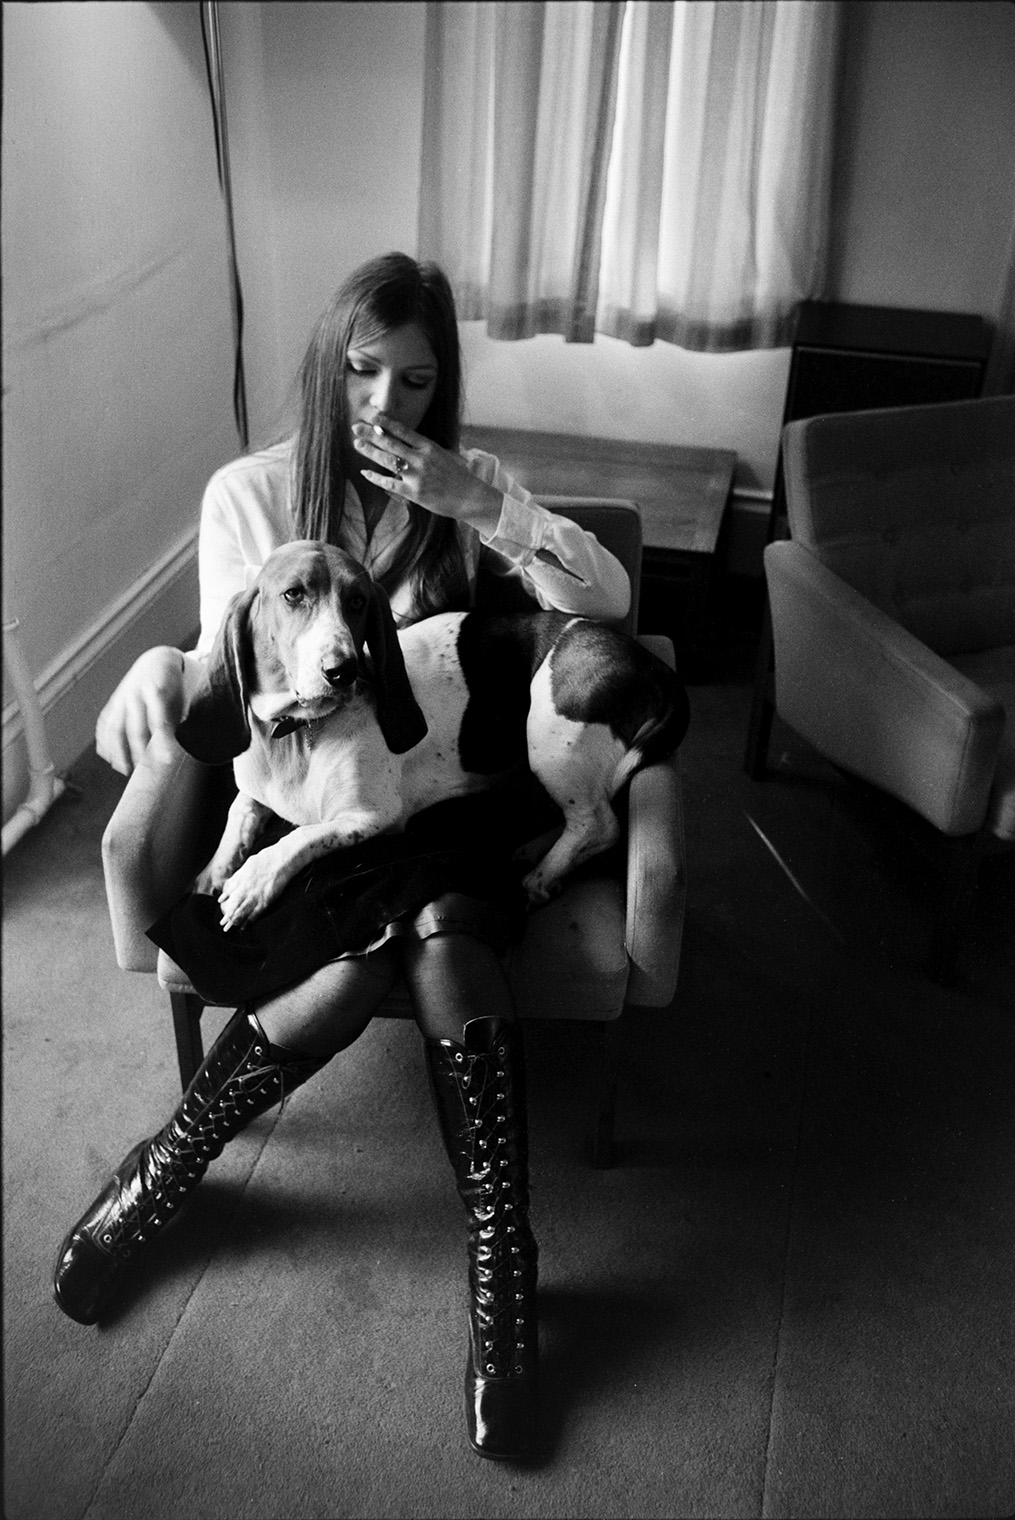 A young woman sat on a chair and smoking, possibly at the Beaford Centre. A Basset dog is sat on her lap.